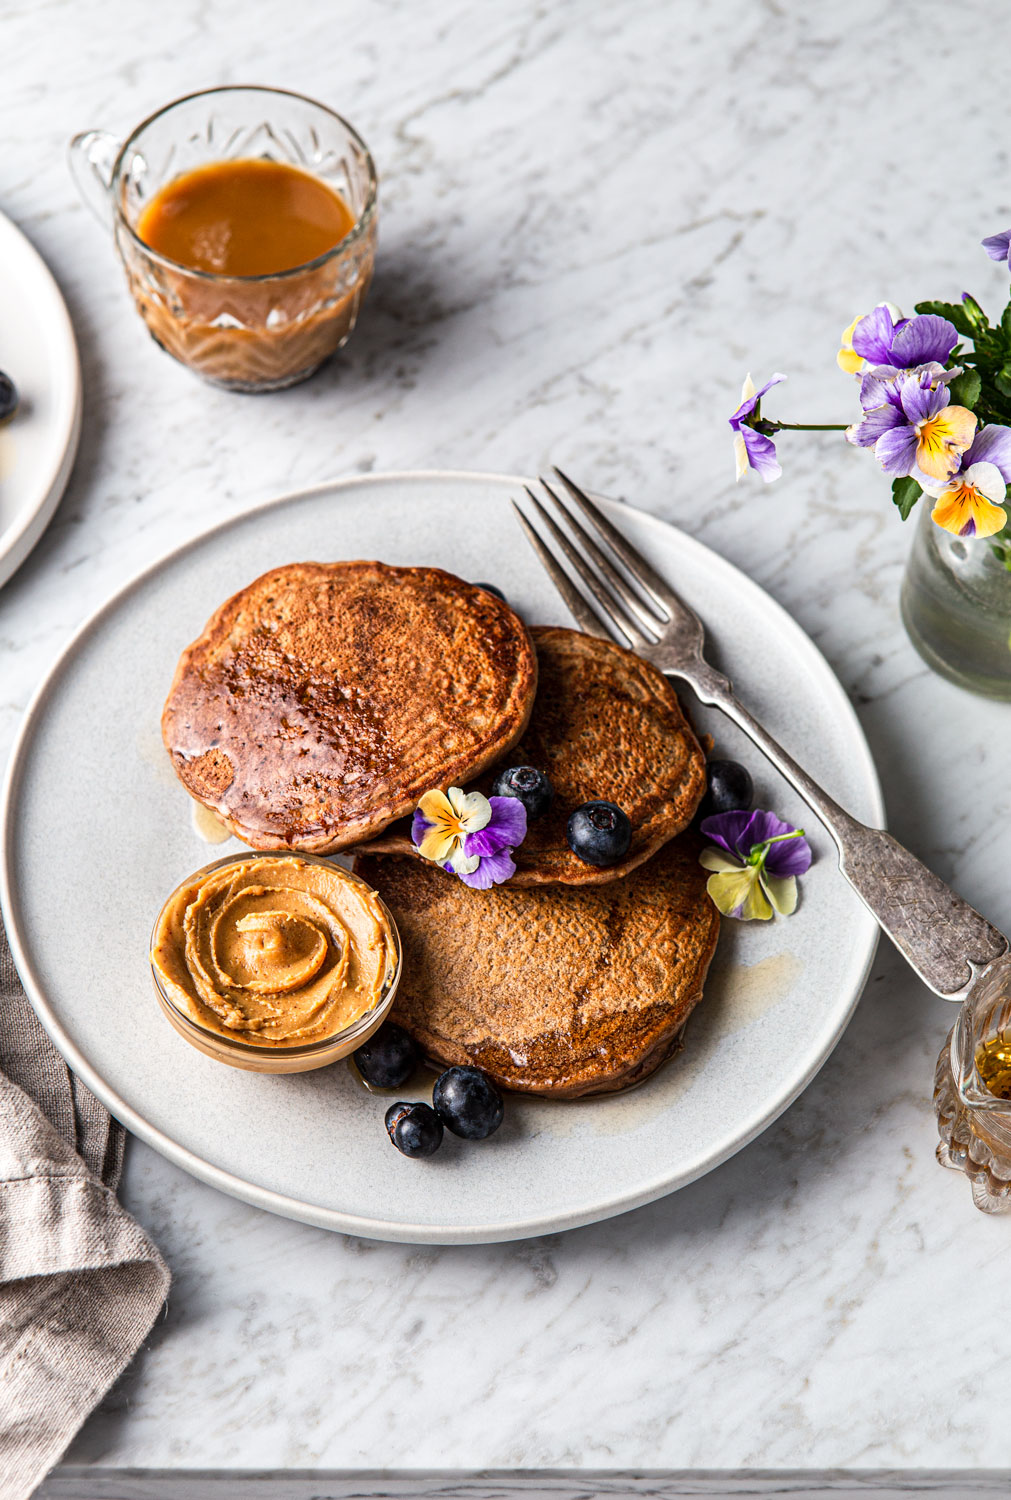 Vegan peanut butter and chocolate Protein Pancakes with flowers photography